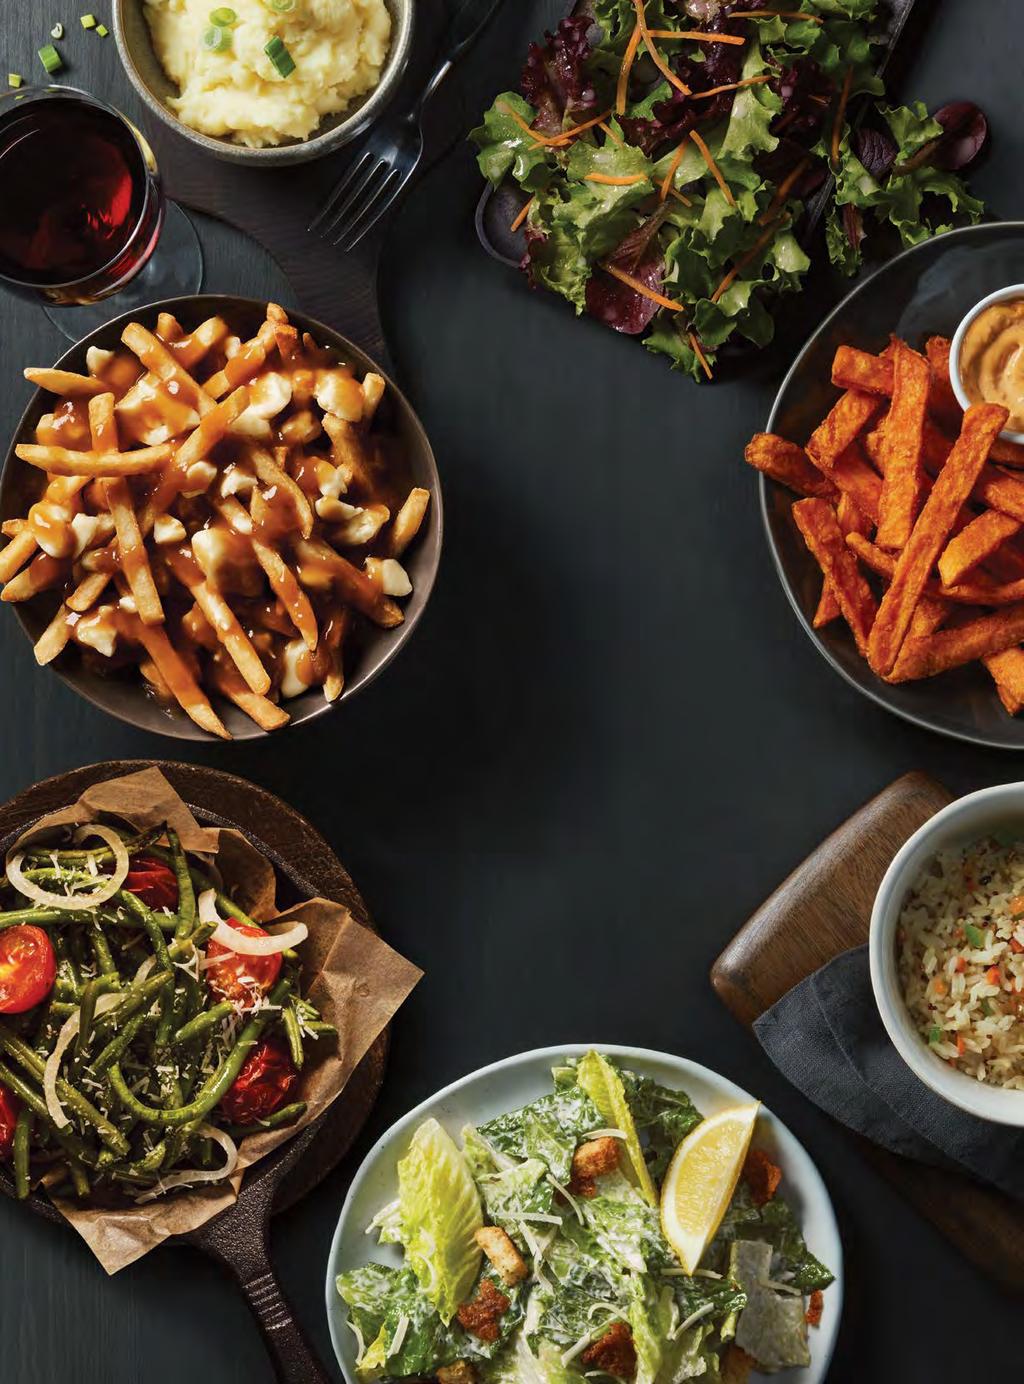 SIDES FEEL LIKE CHANGING YOUR FRIES?